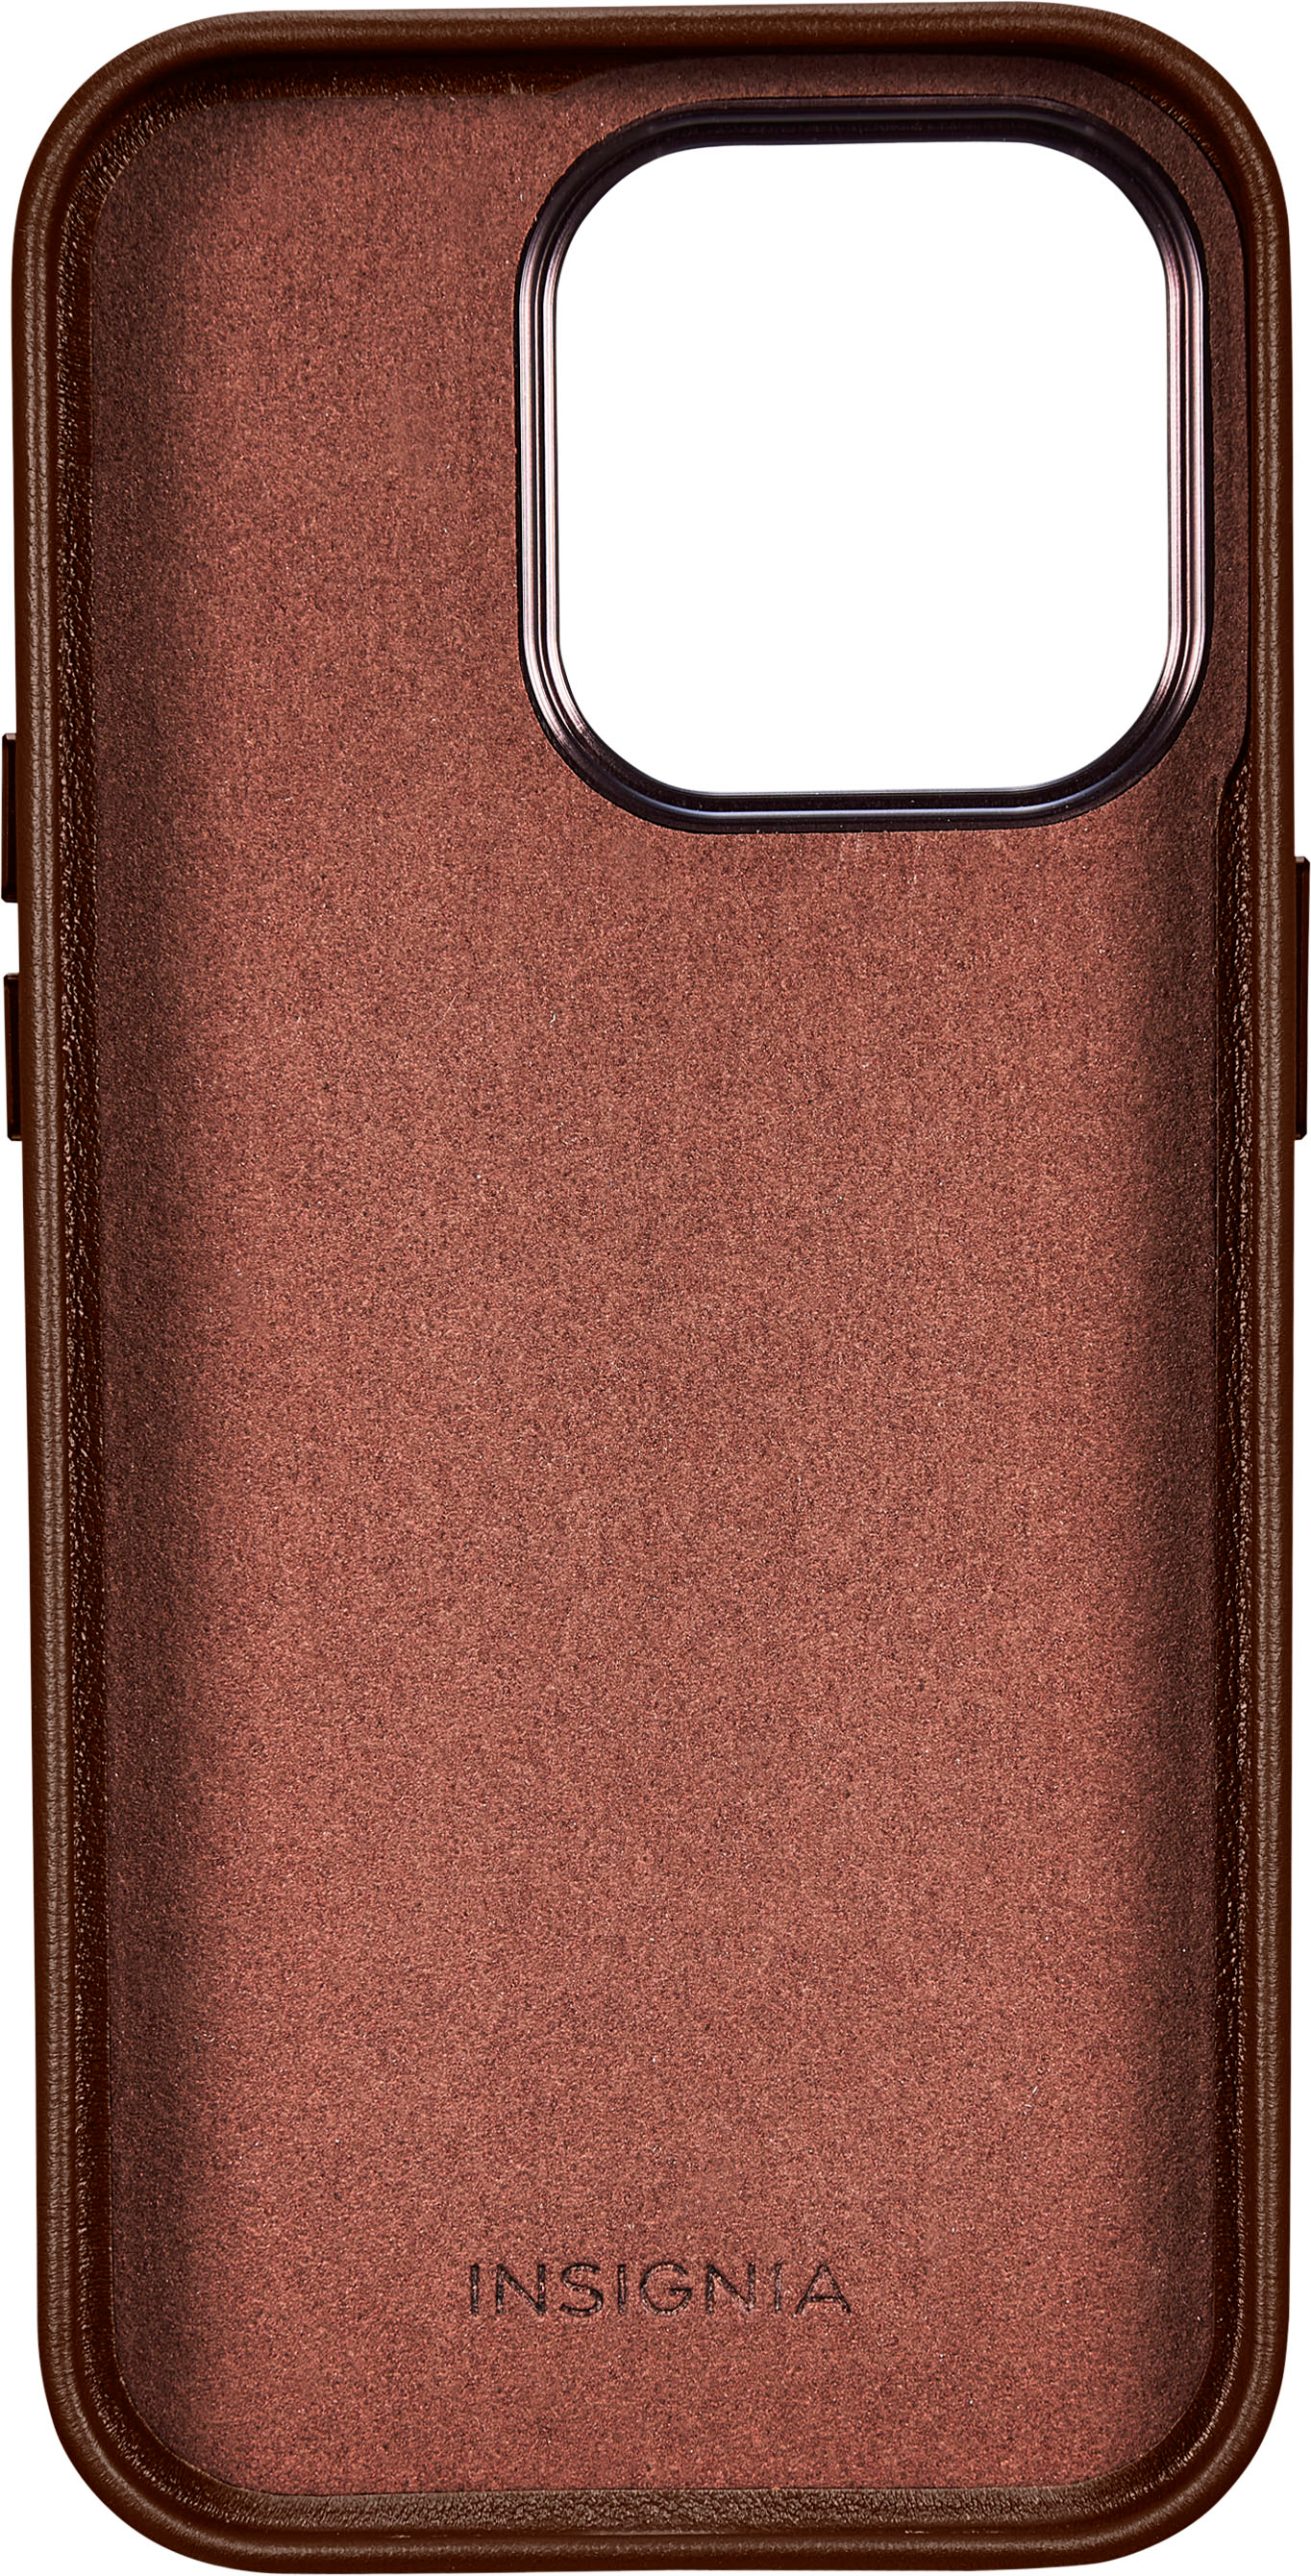 Insignia - Leather Wallet Case for iPhone 14 Pro Max - Pink